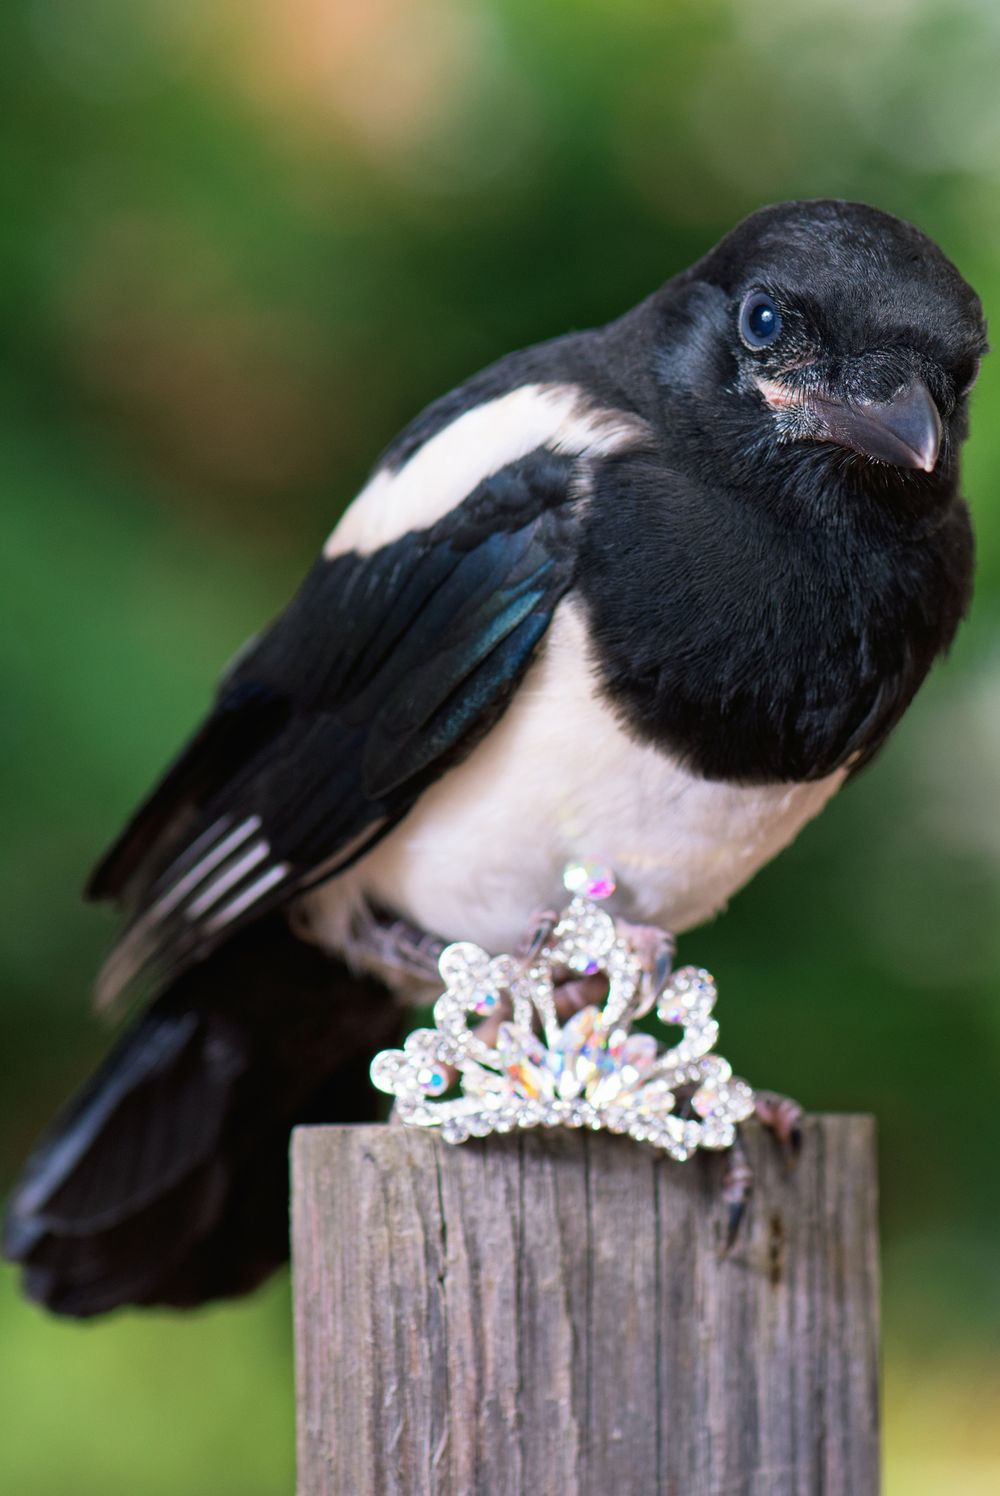 Magpies Pass Many Intelligence Tests